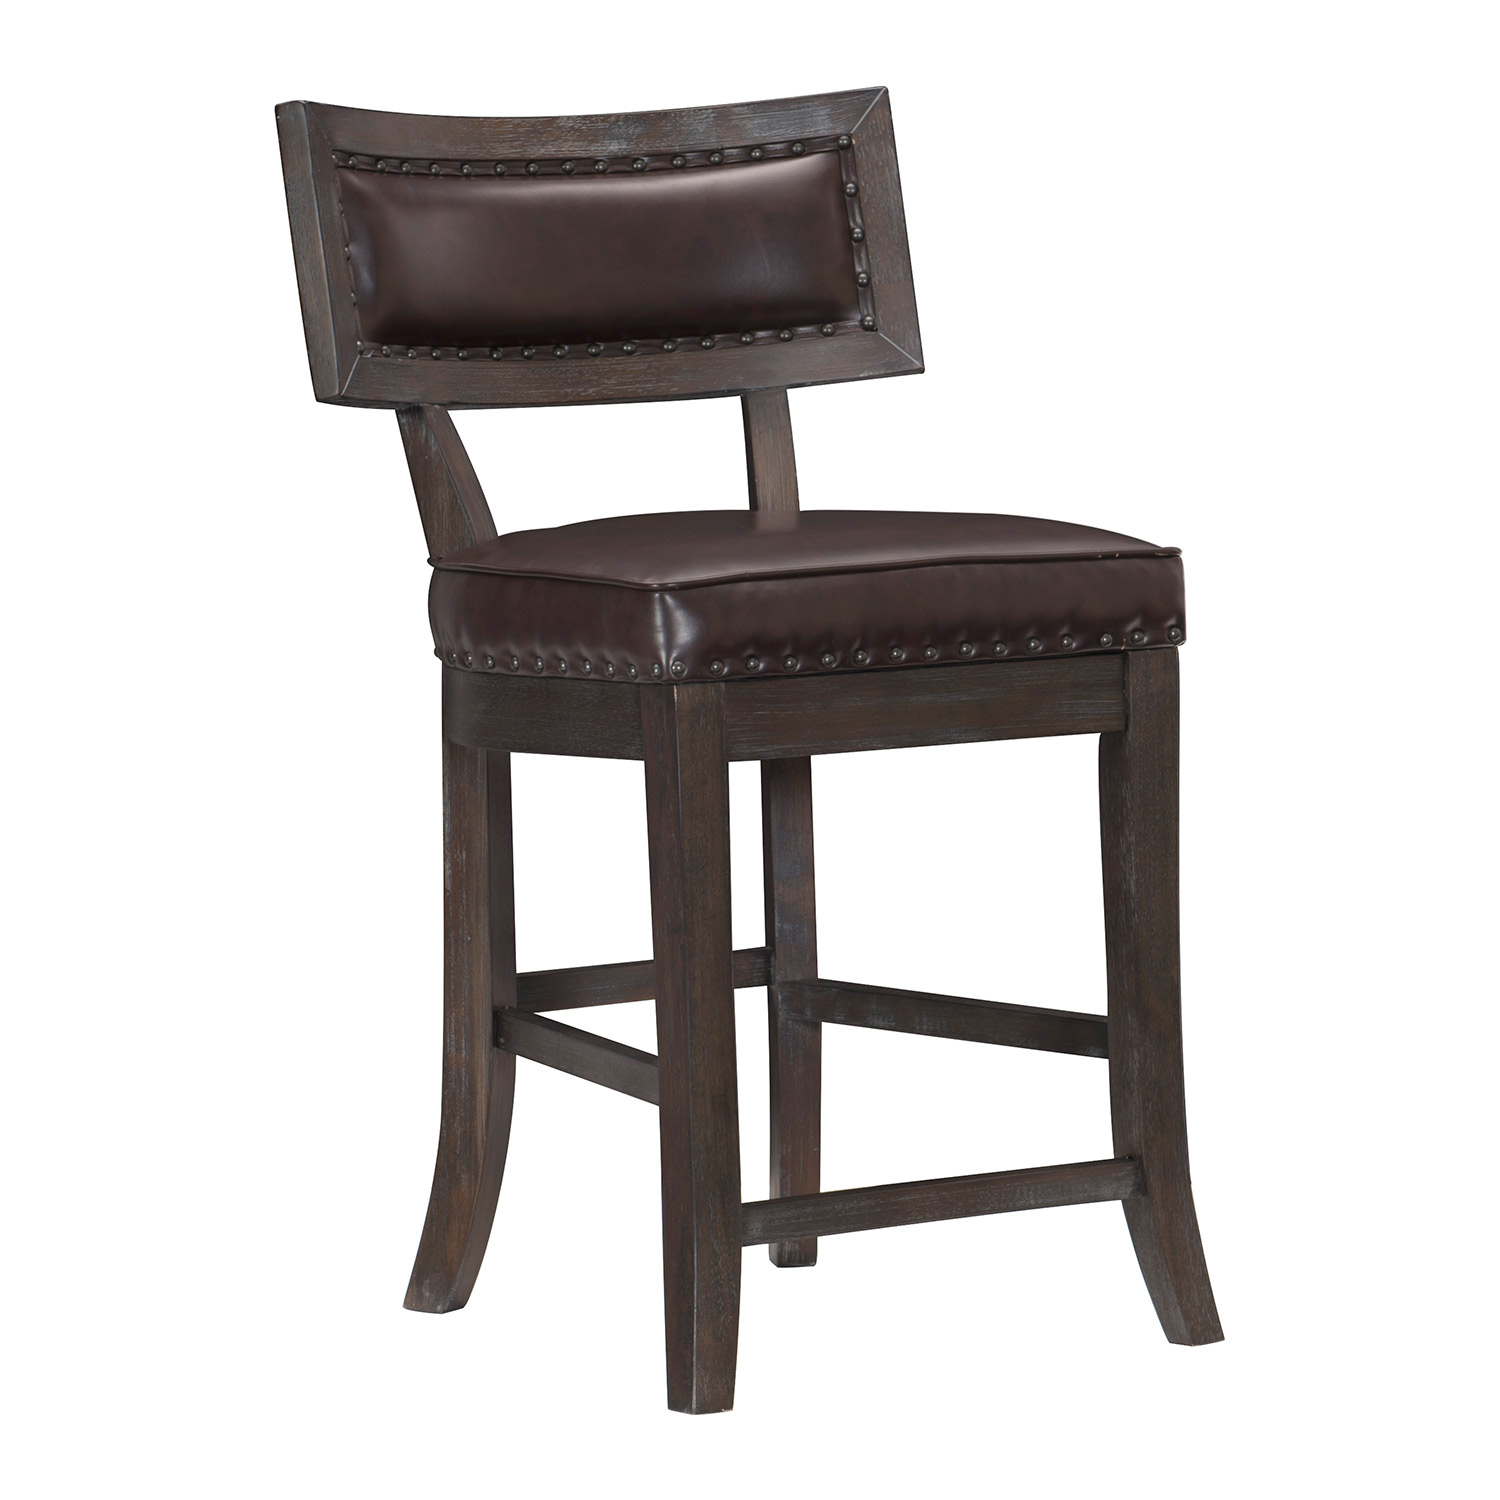 Homelegance Oxton Counter Height Chair - Rustic Brown